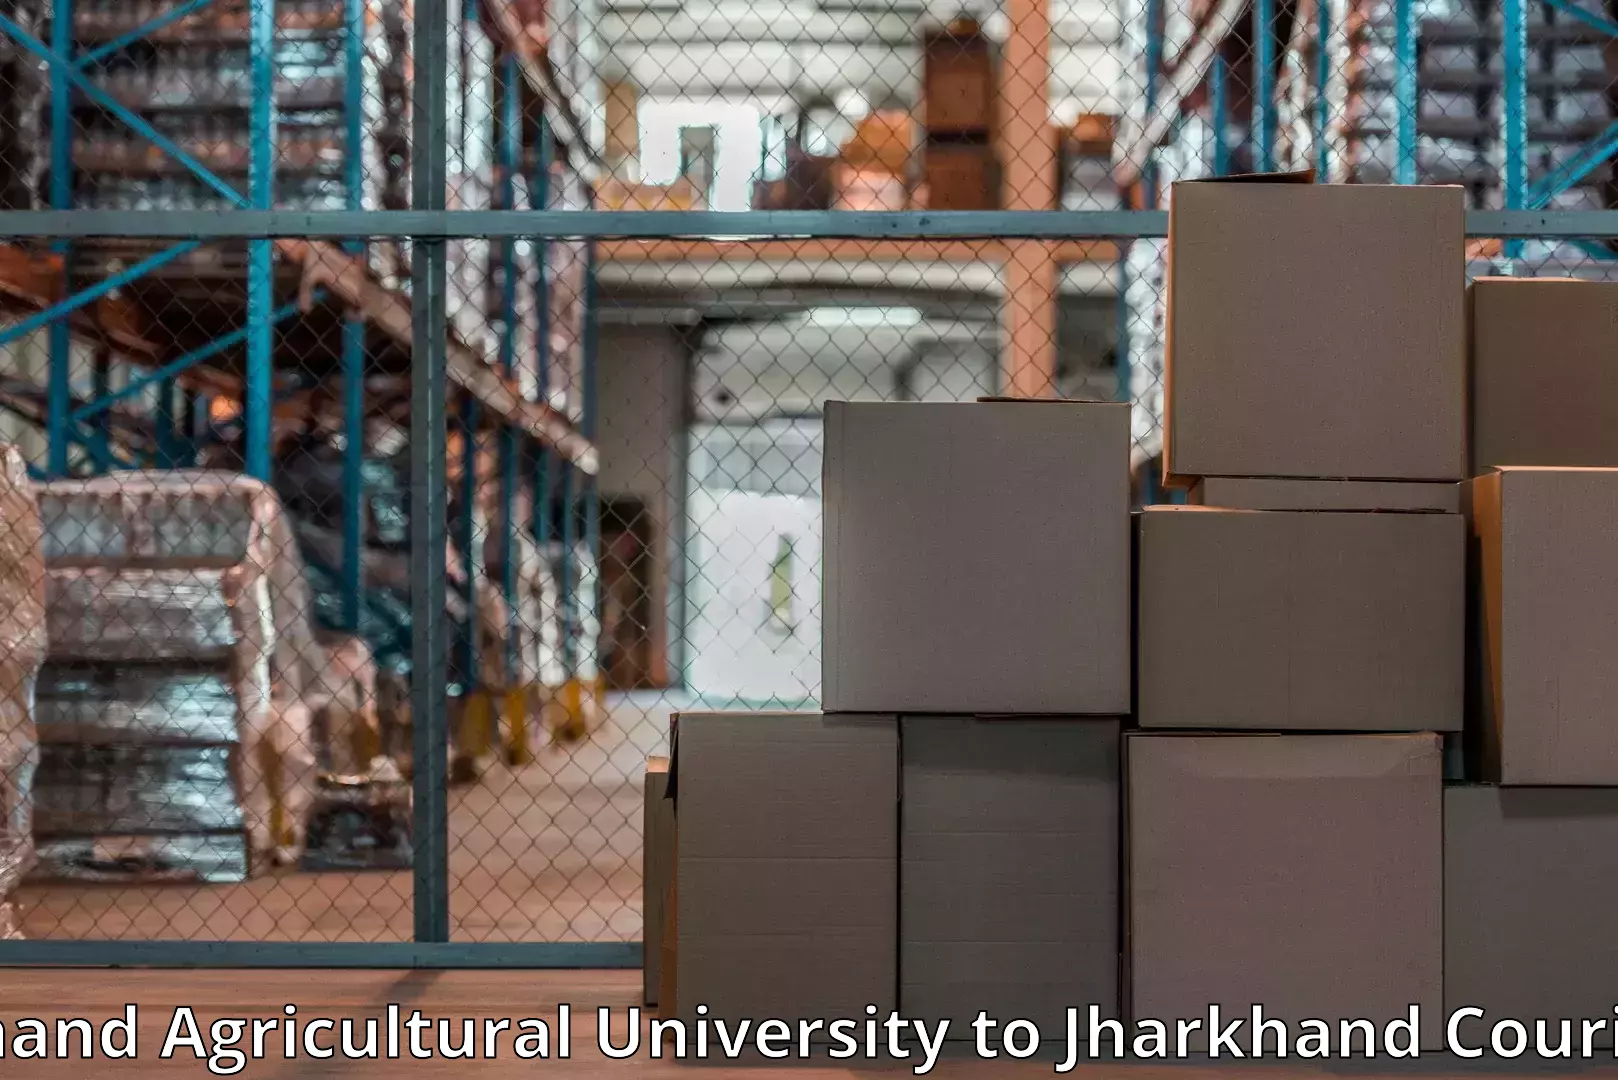 Advanced household movers in Anand Agricultural University to Topchanchi